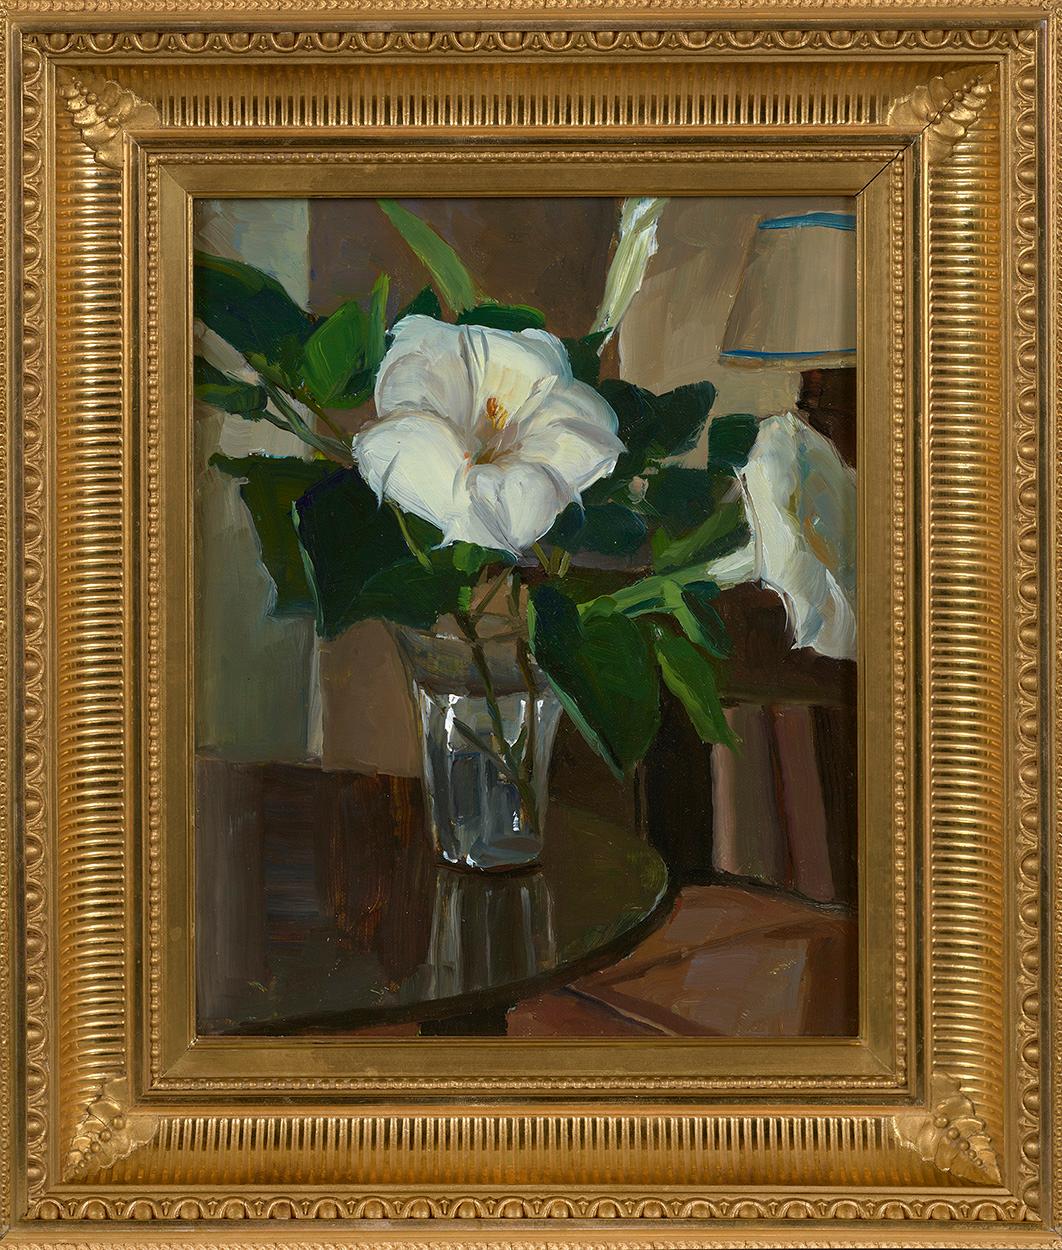 Datura - Painting by Harry Leith-Ross